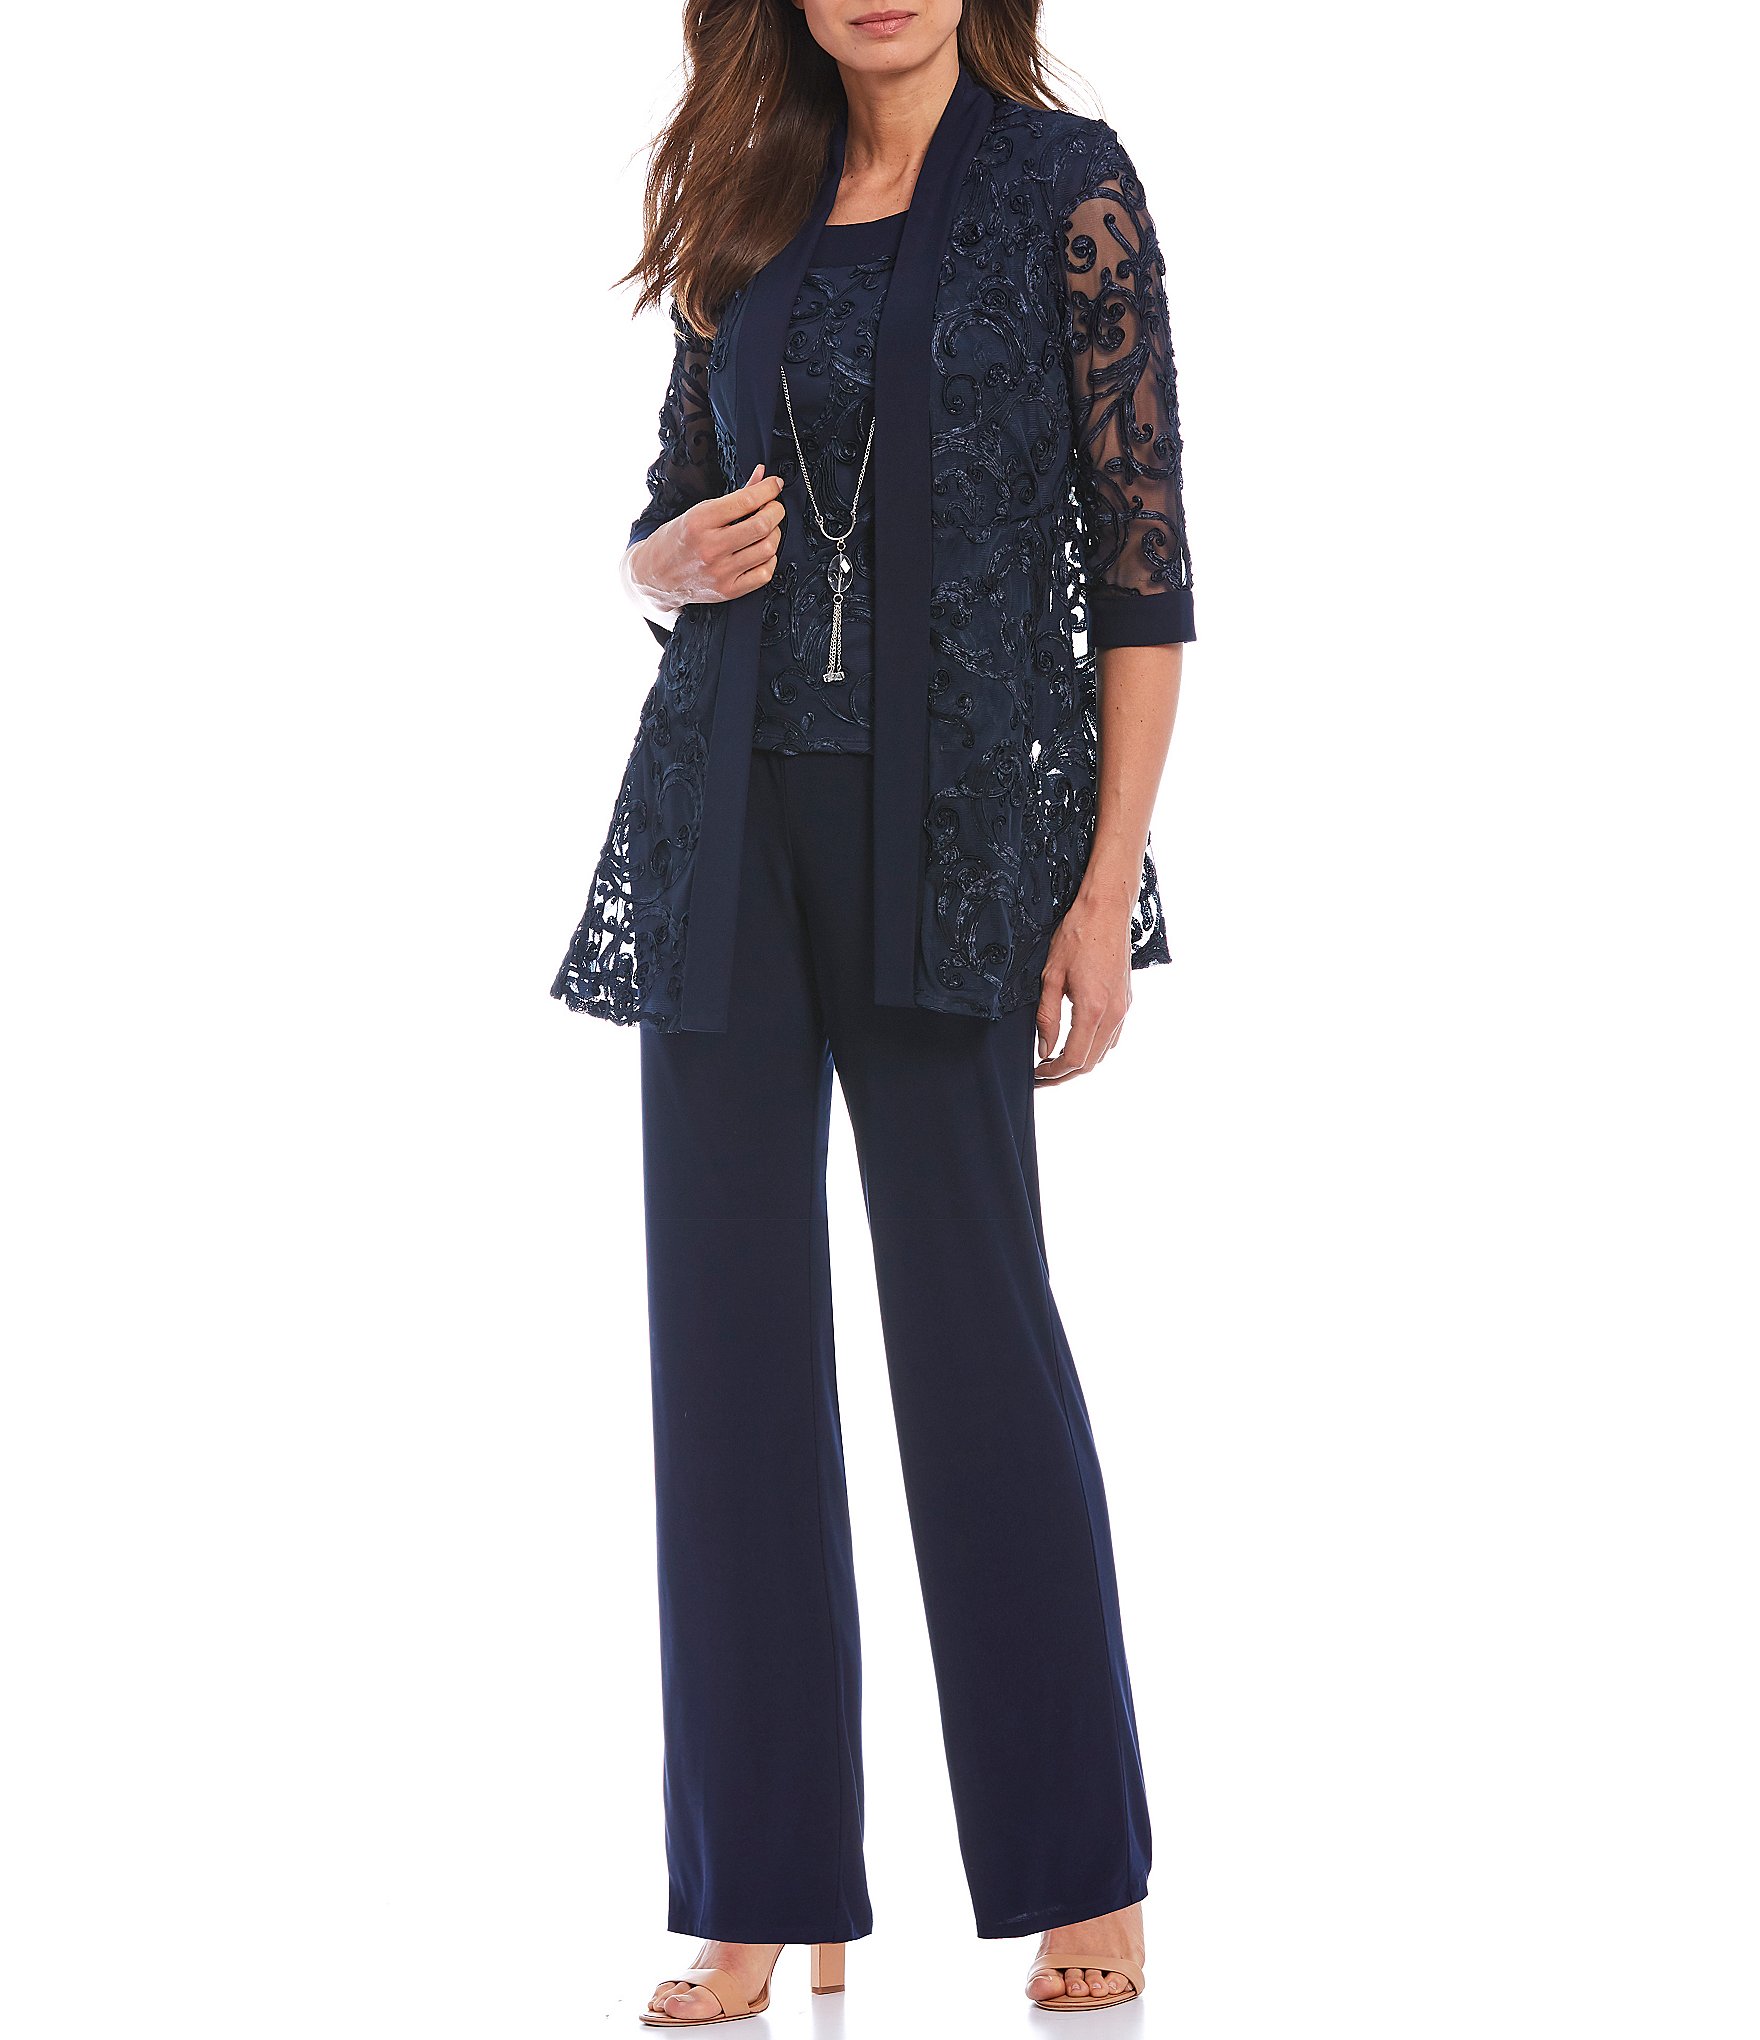 Buy > dillards dressy pant suits > in stock